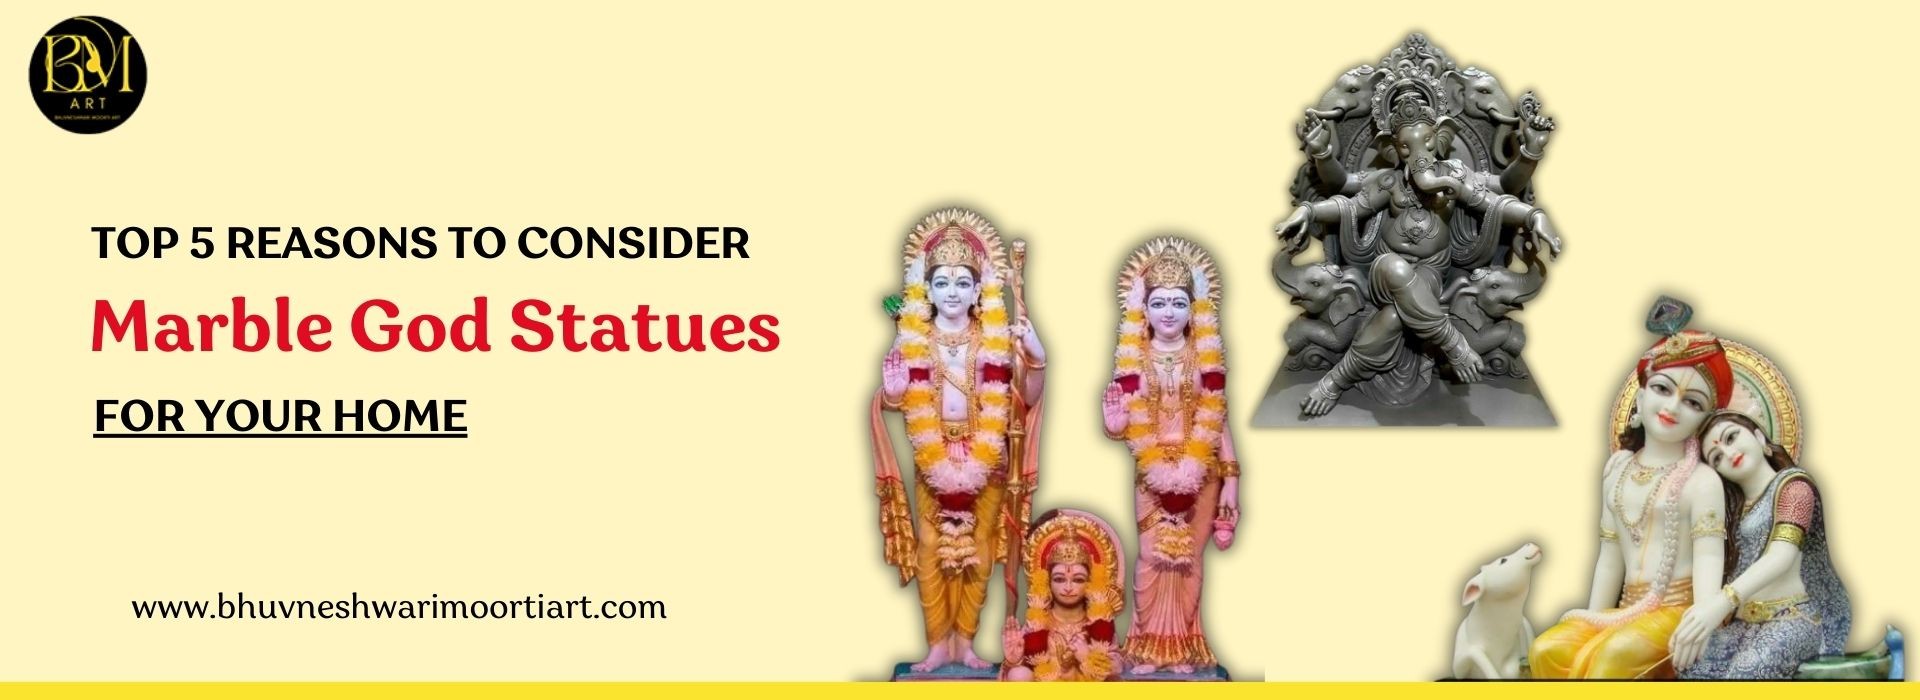 Top 5 Reasons to Consider Marble God Statues for Your Home